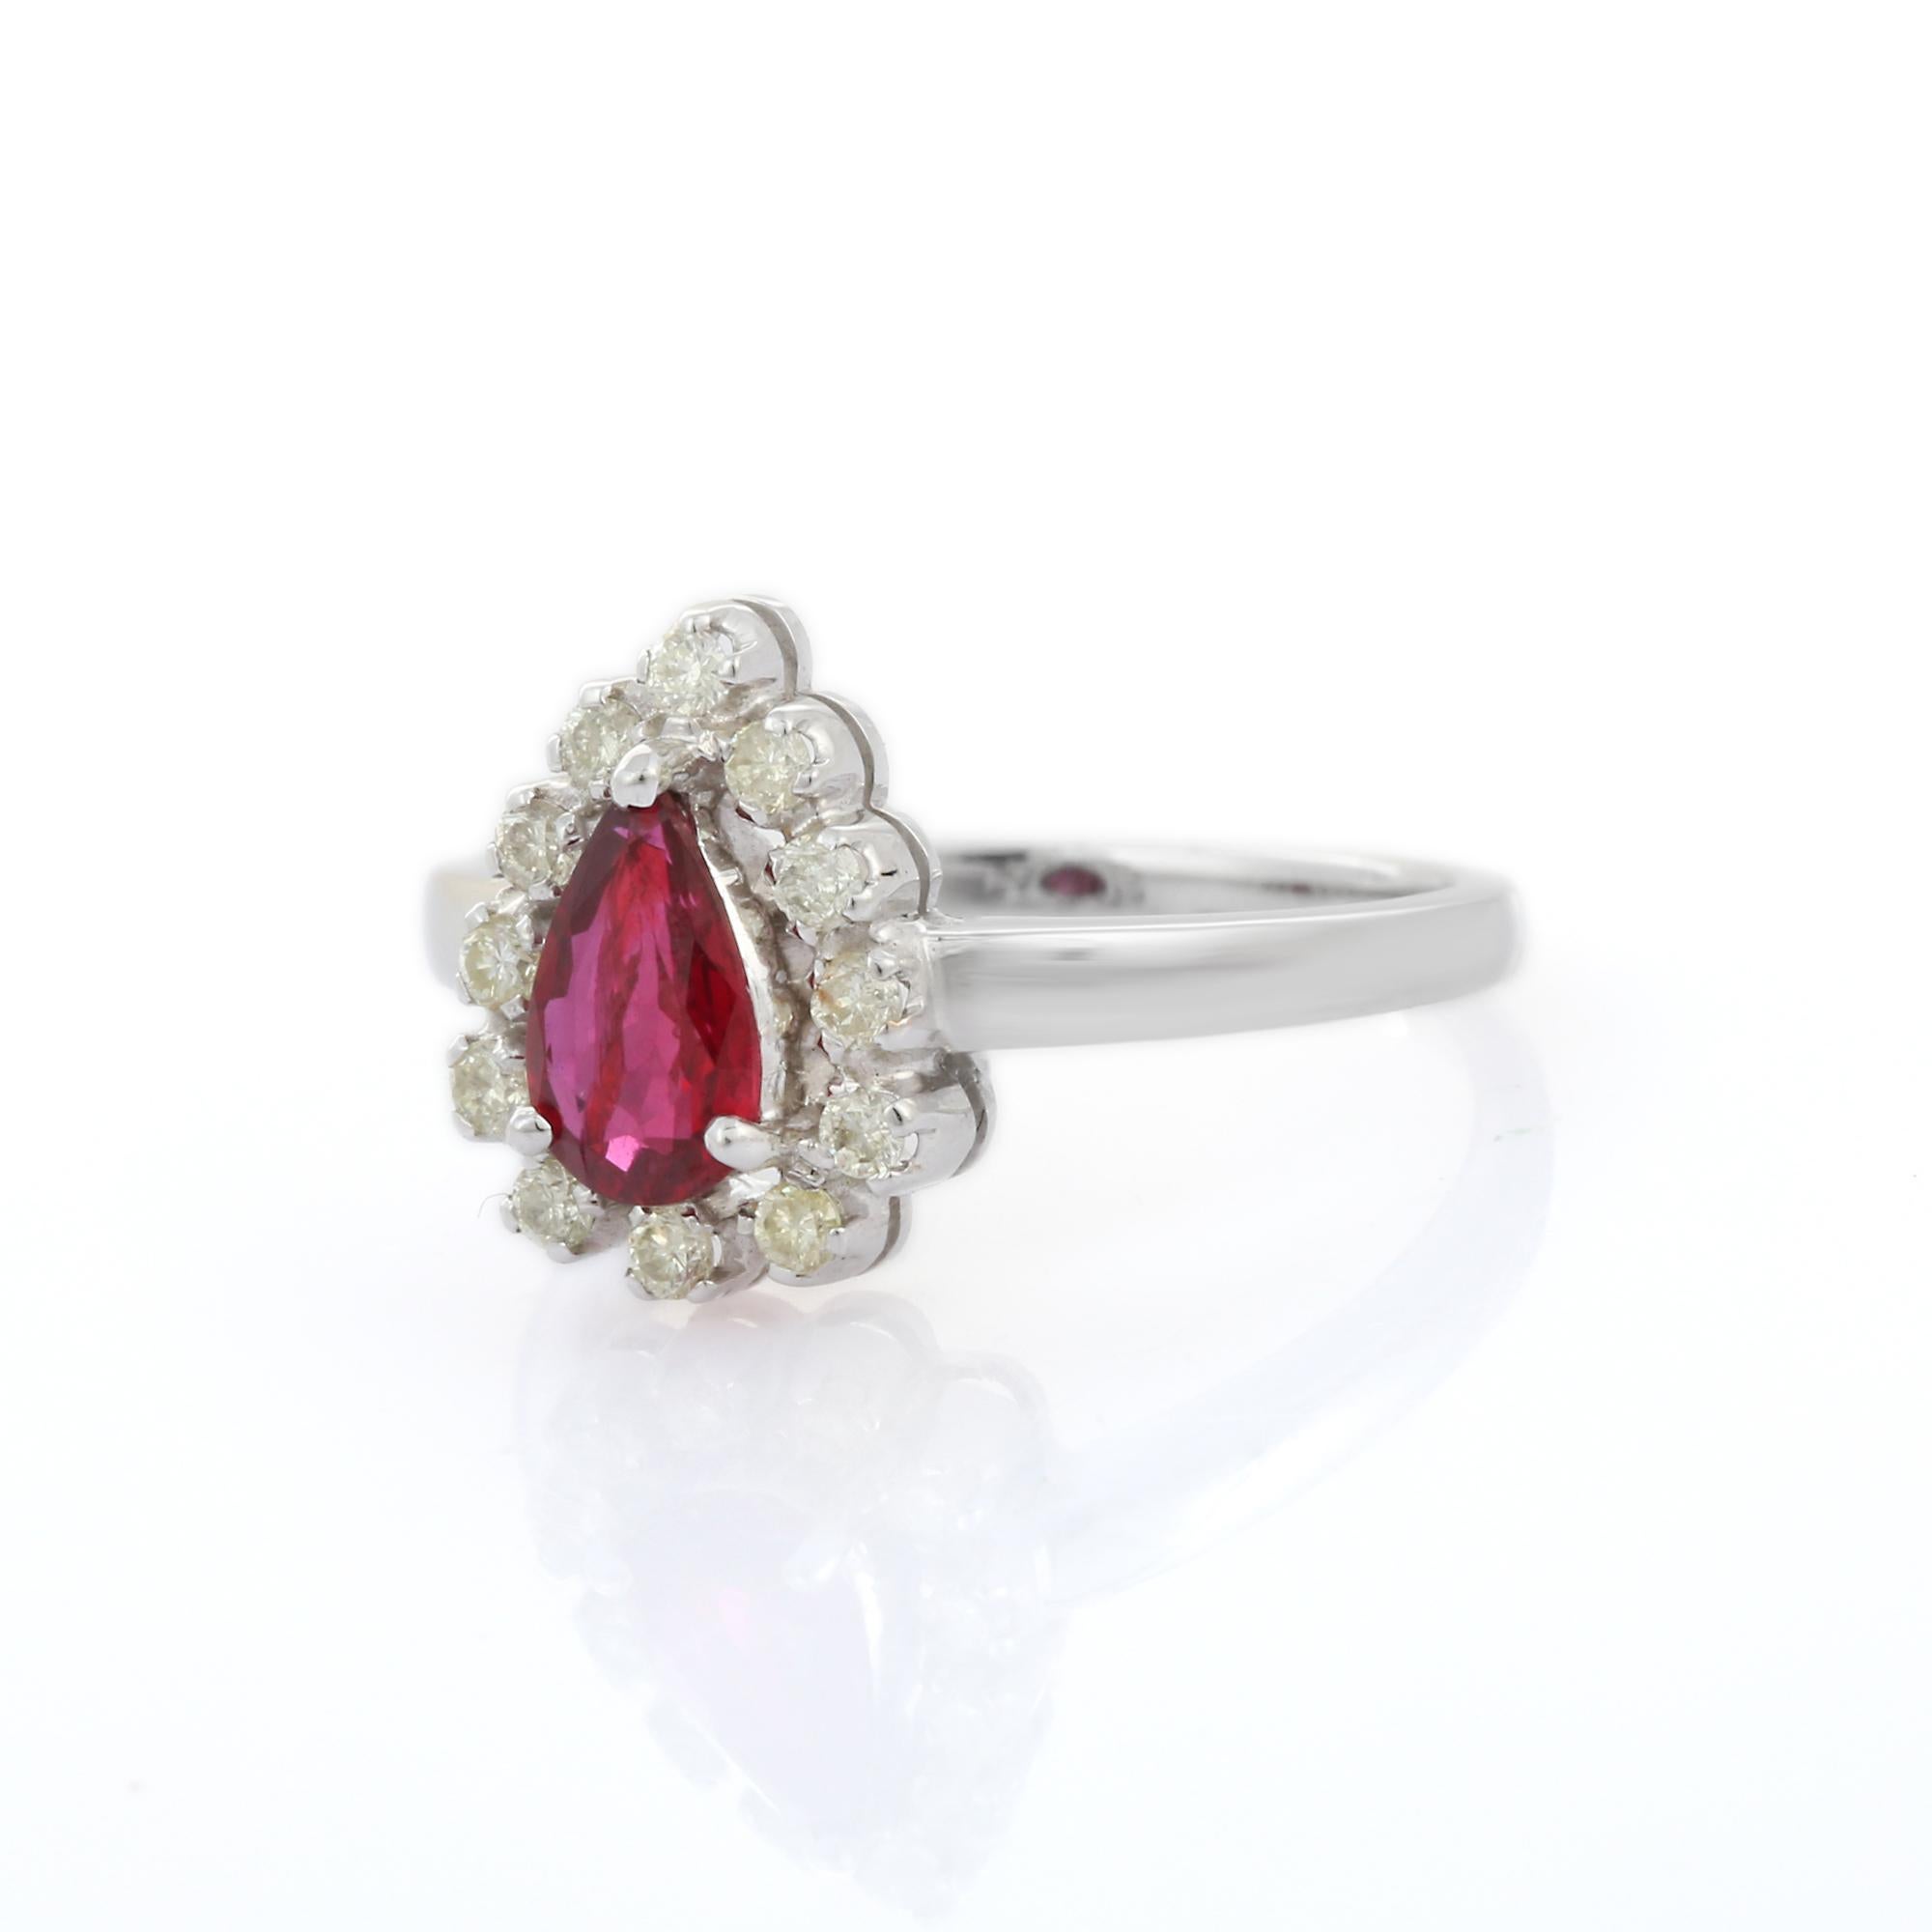 For Sale:  Pear Cut Ruby Diamond Engagement Ring in 14K White Gold  3